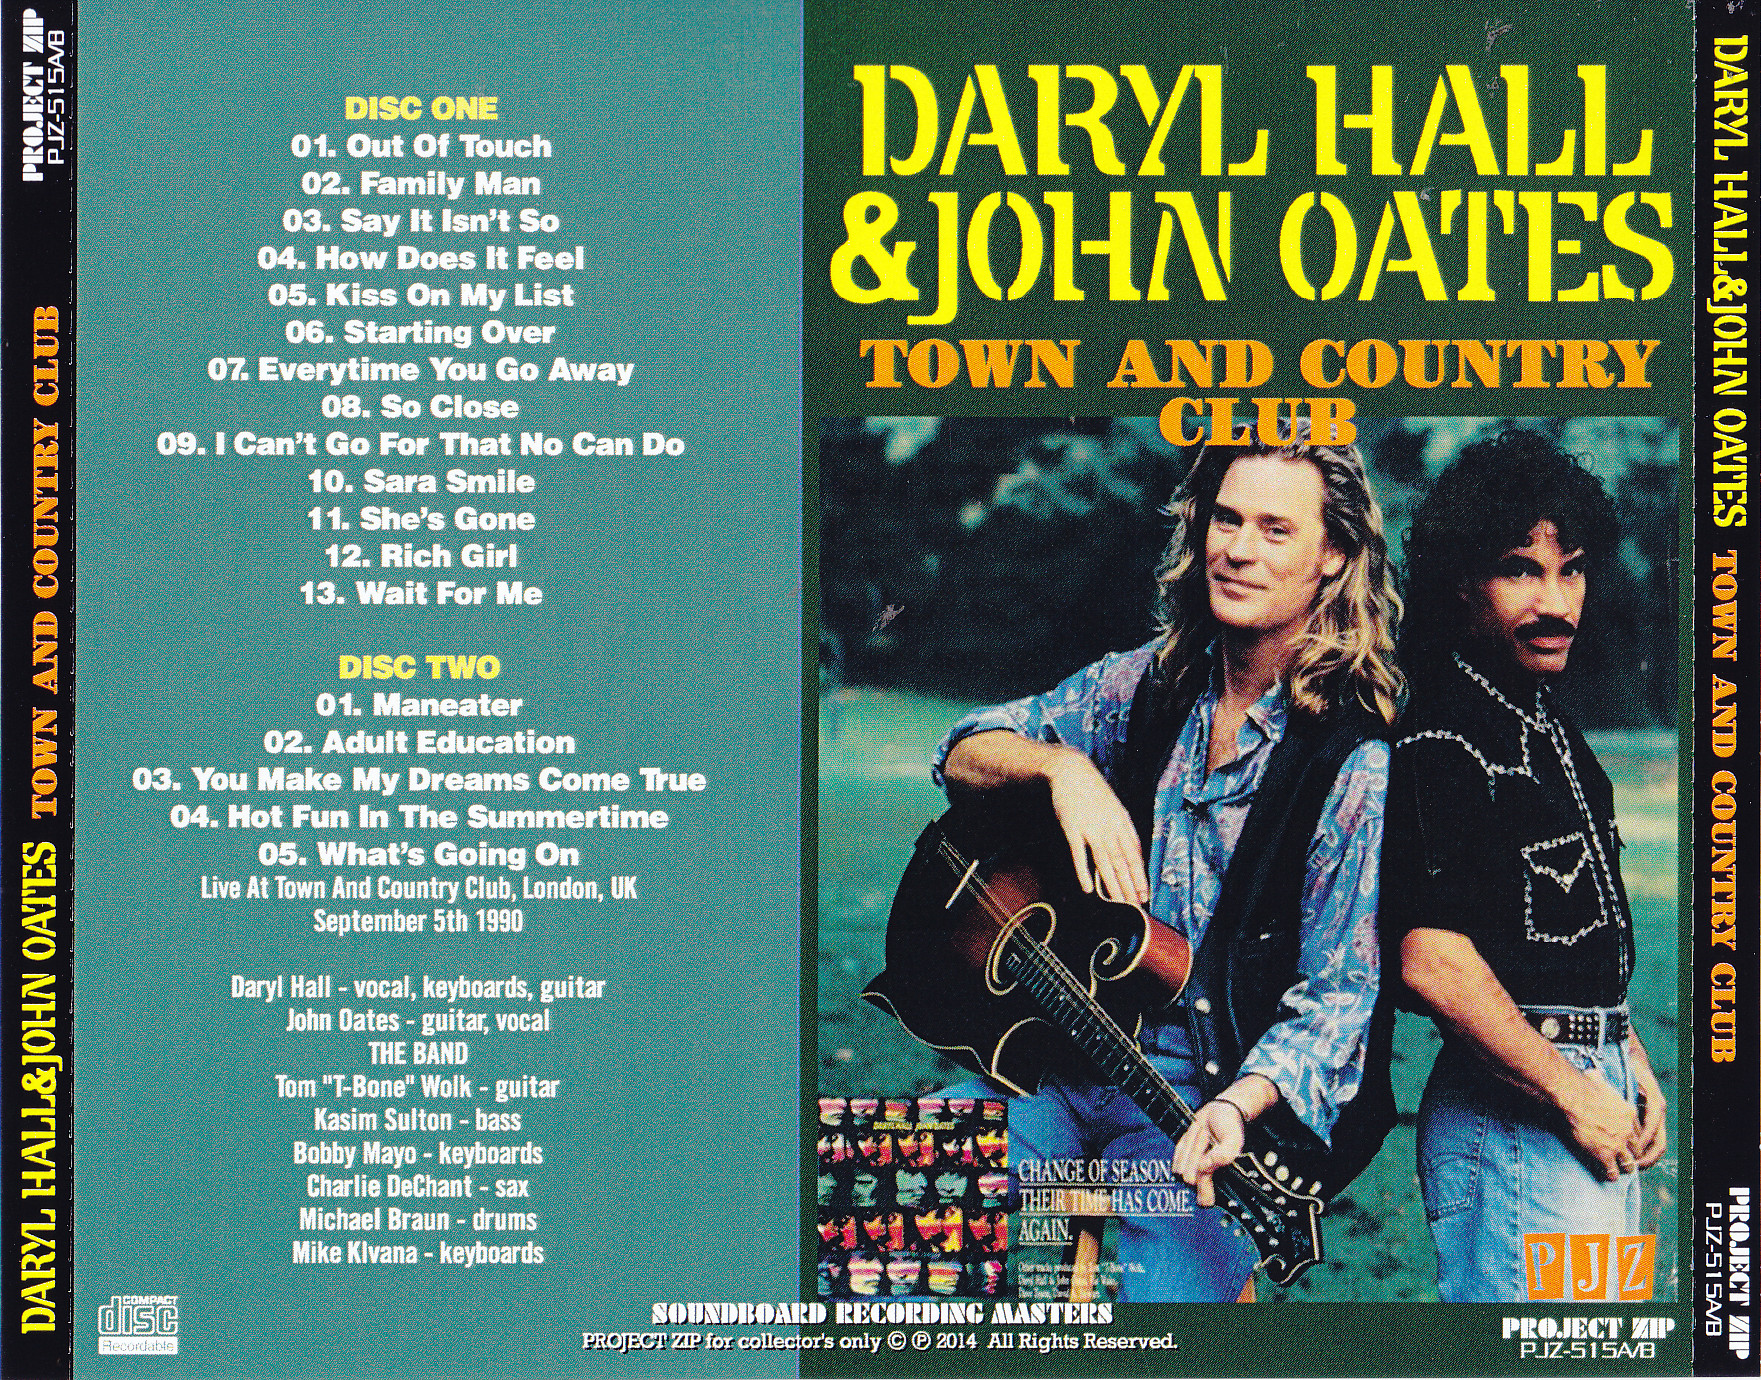 Daryl Hall & John Oates / Town And Country Club / 2CDR – GiGinJapan